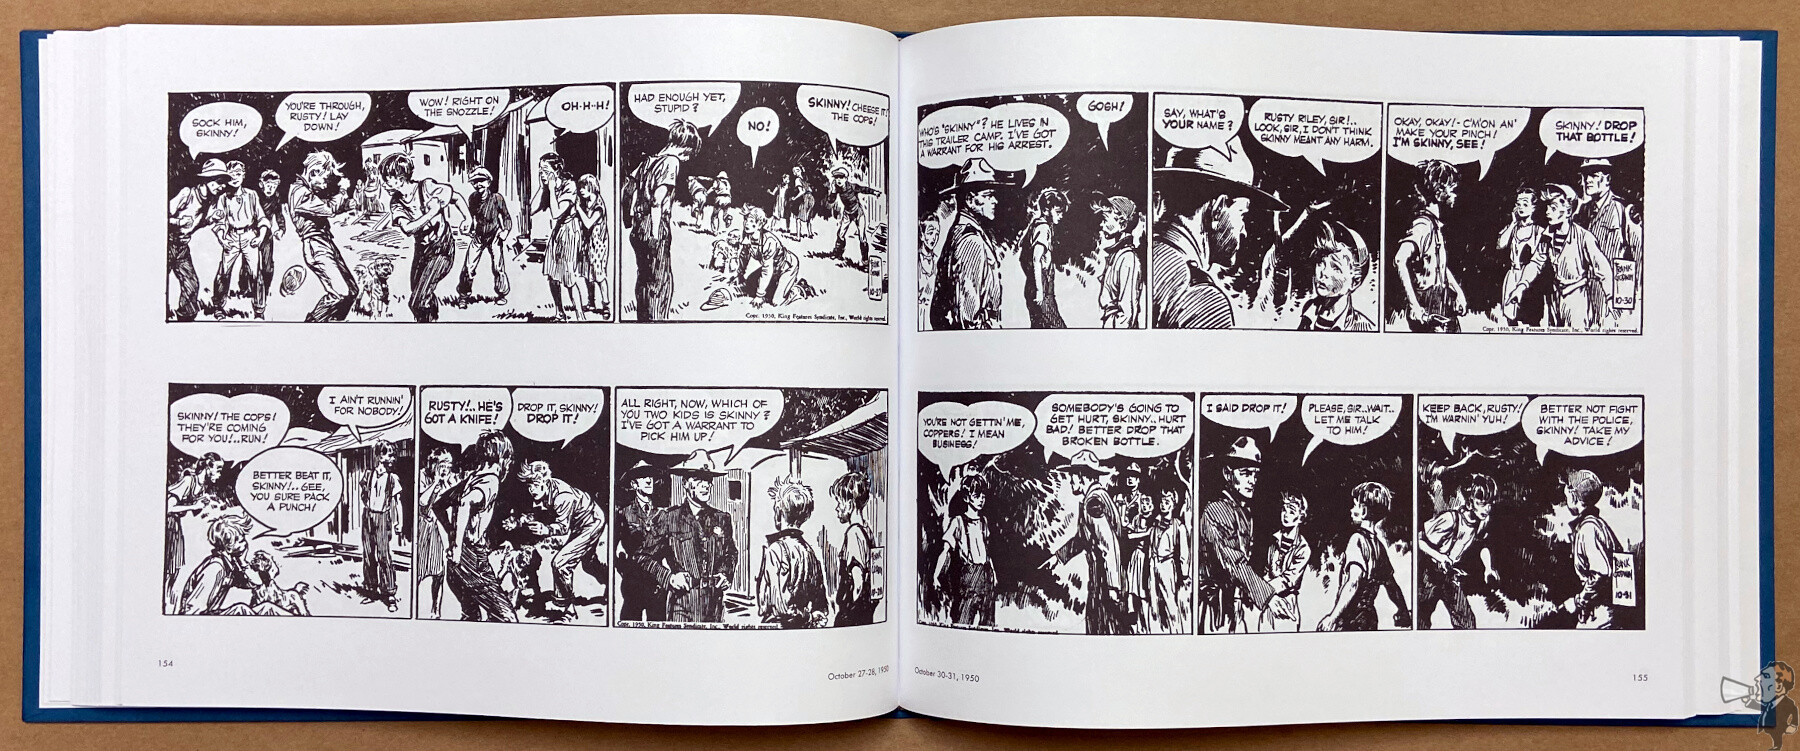 Rusty Riley by Frank Godwin Volume Two Dailies interior 7